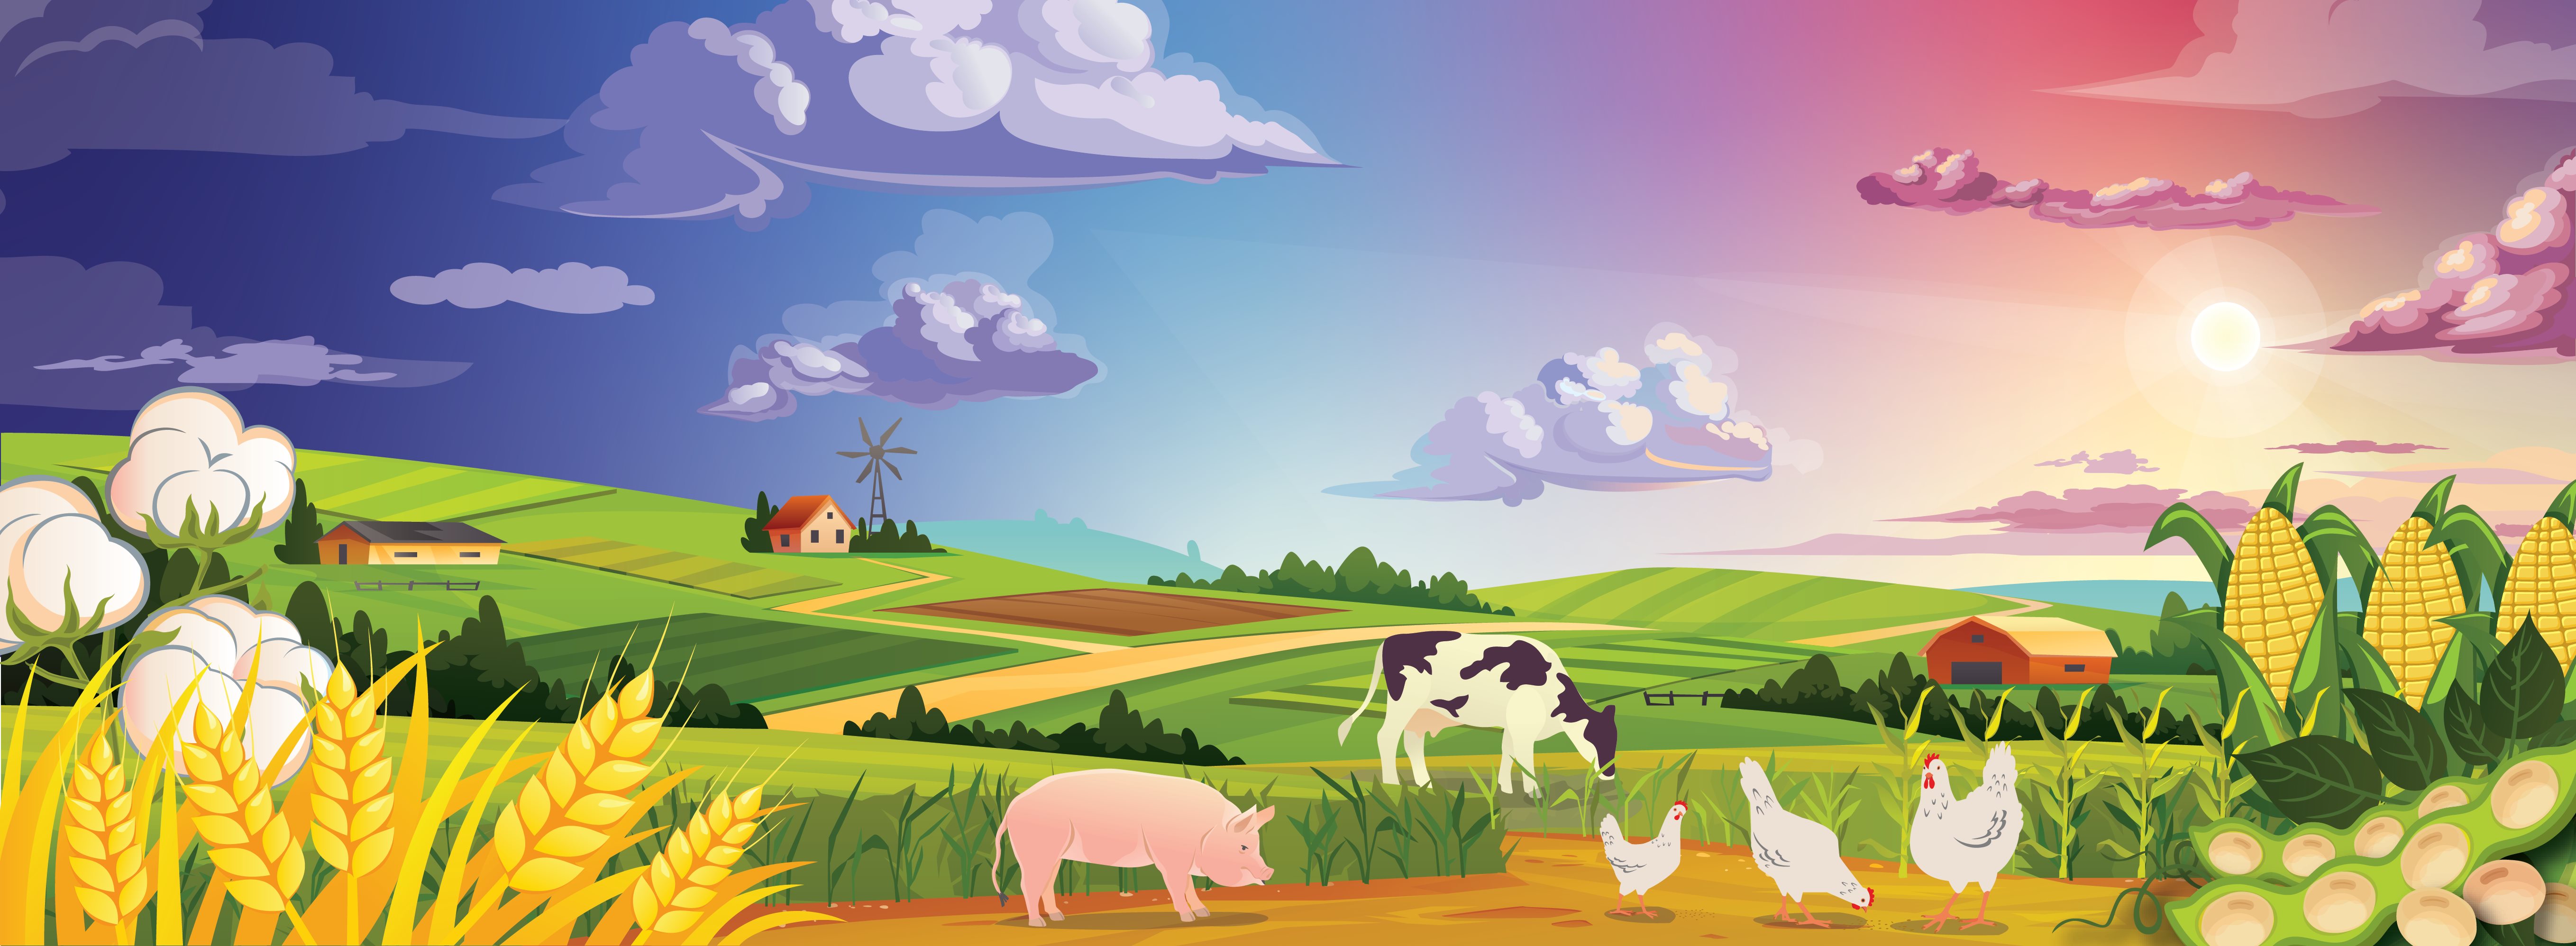 Graphic depiction of farmland with livestock and crops.